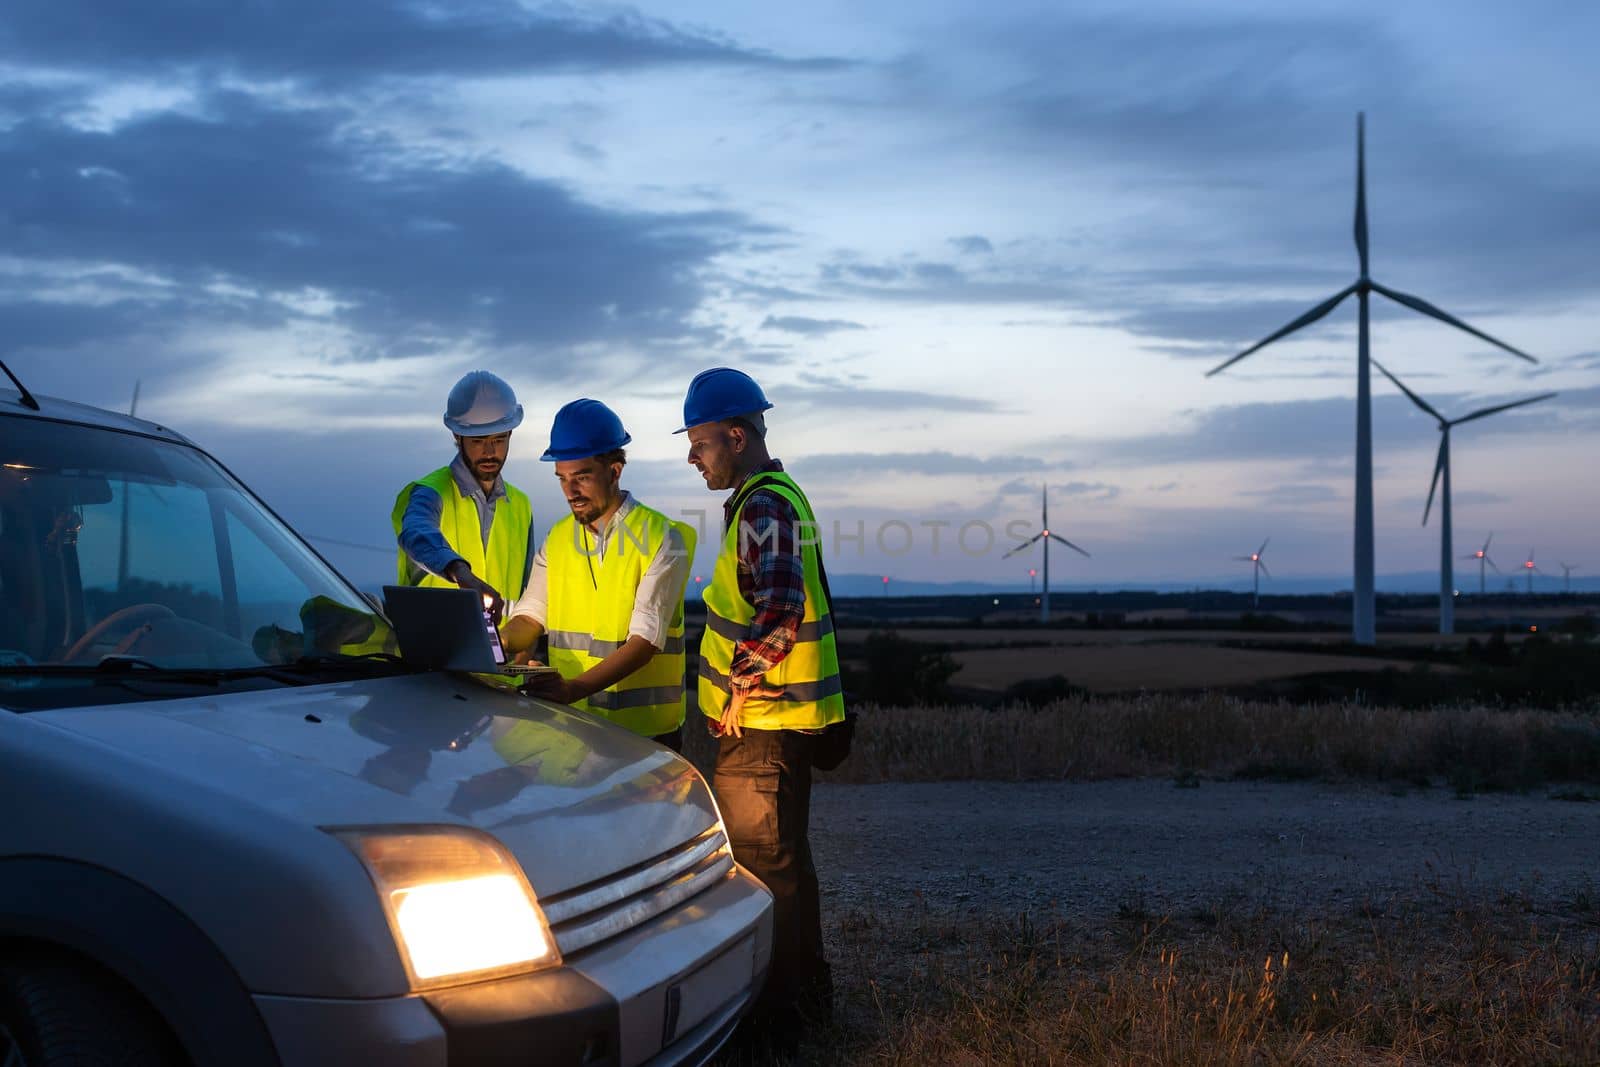 Group of engineers and maintenance workers using laptop together discussing plans in wind turbine farm at sunset. Renewable energies concept.